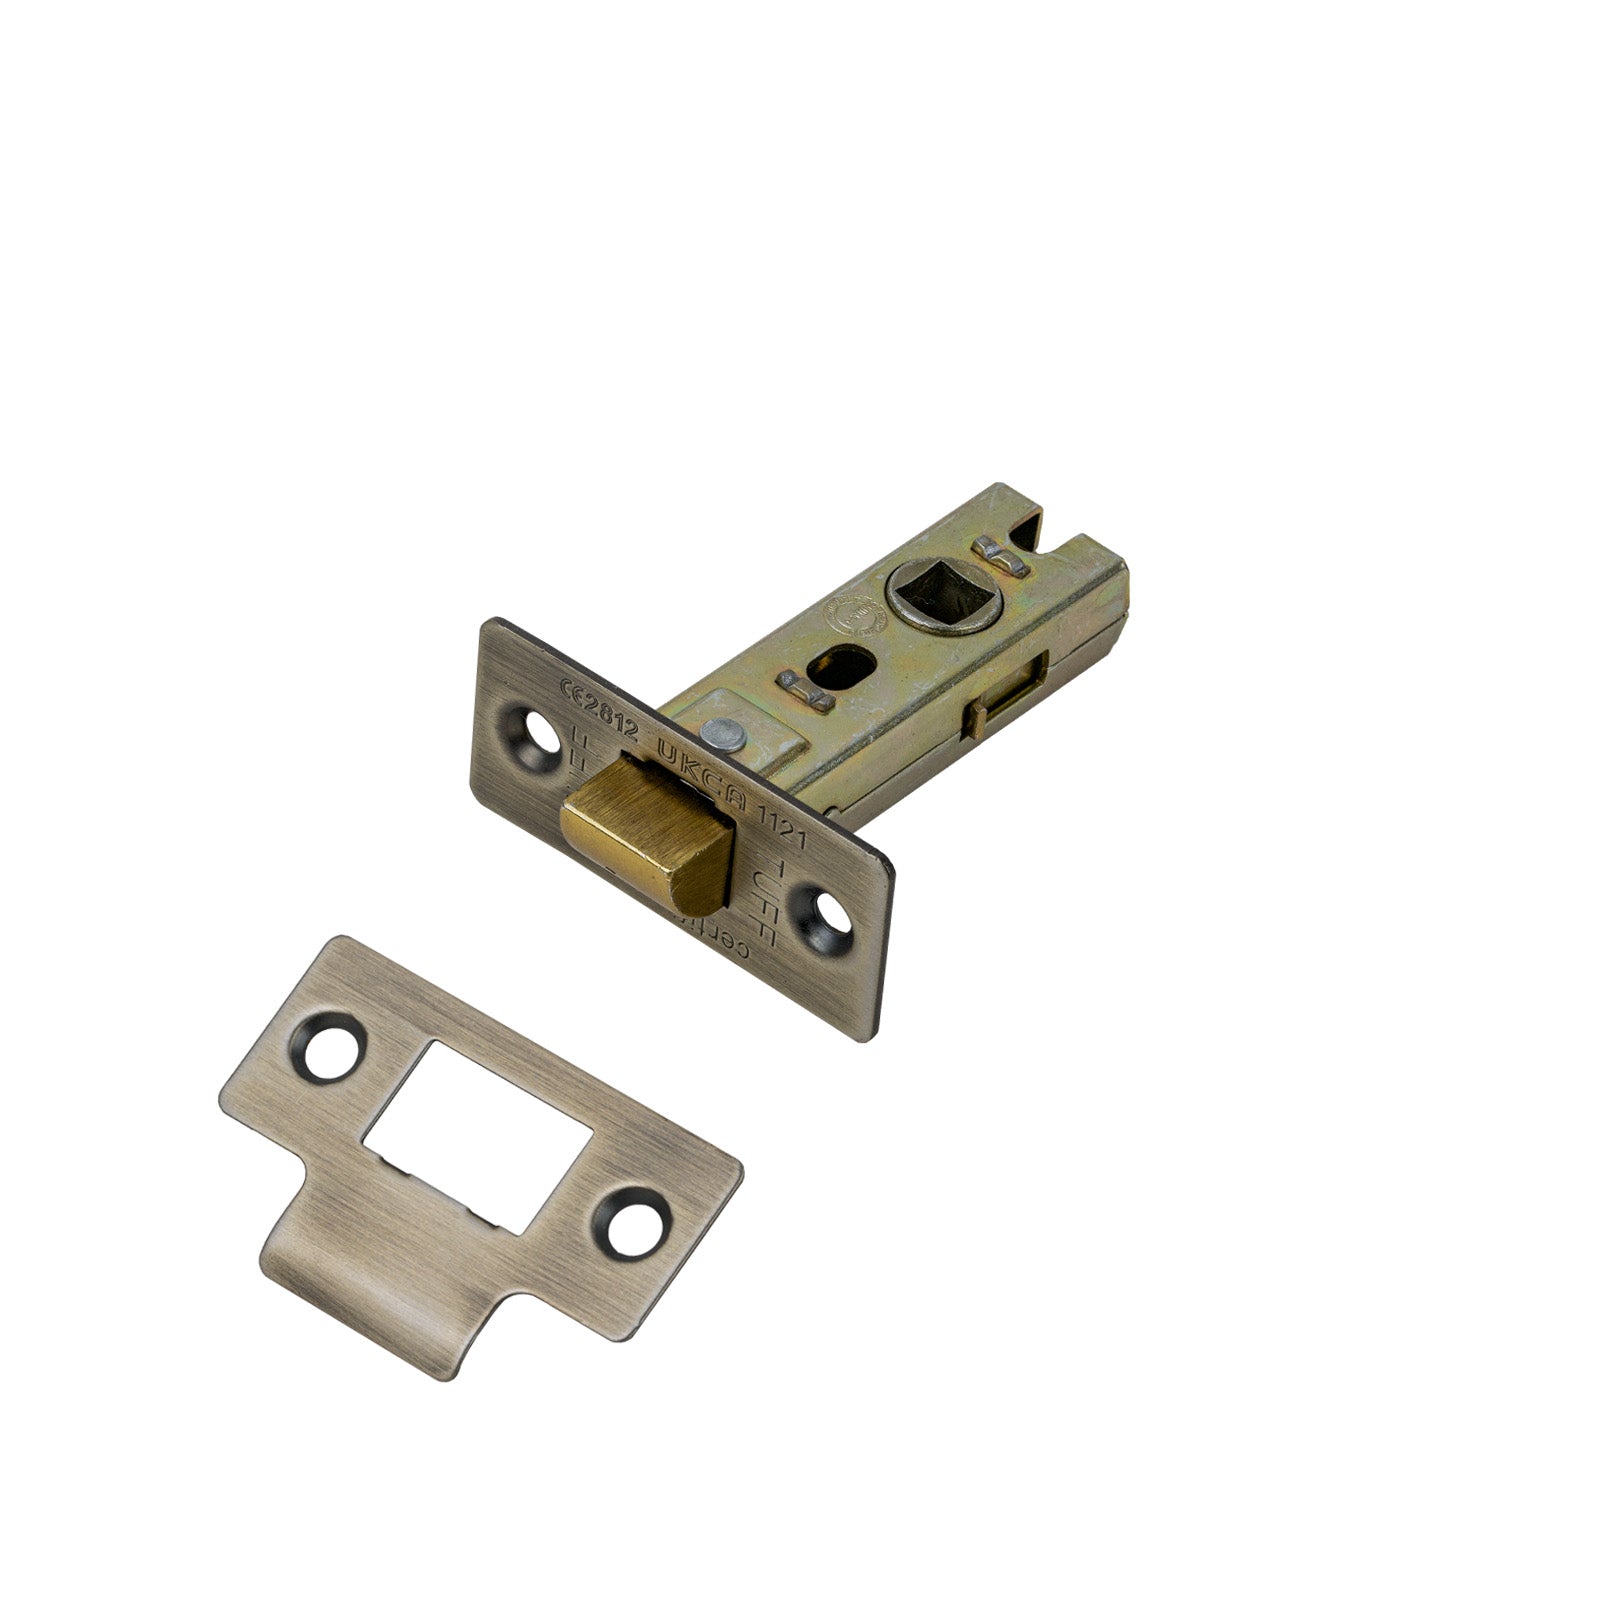 SHOW Tubular Latch - 2.5 Inch with Matt Antique Brass finished forend and striker plate